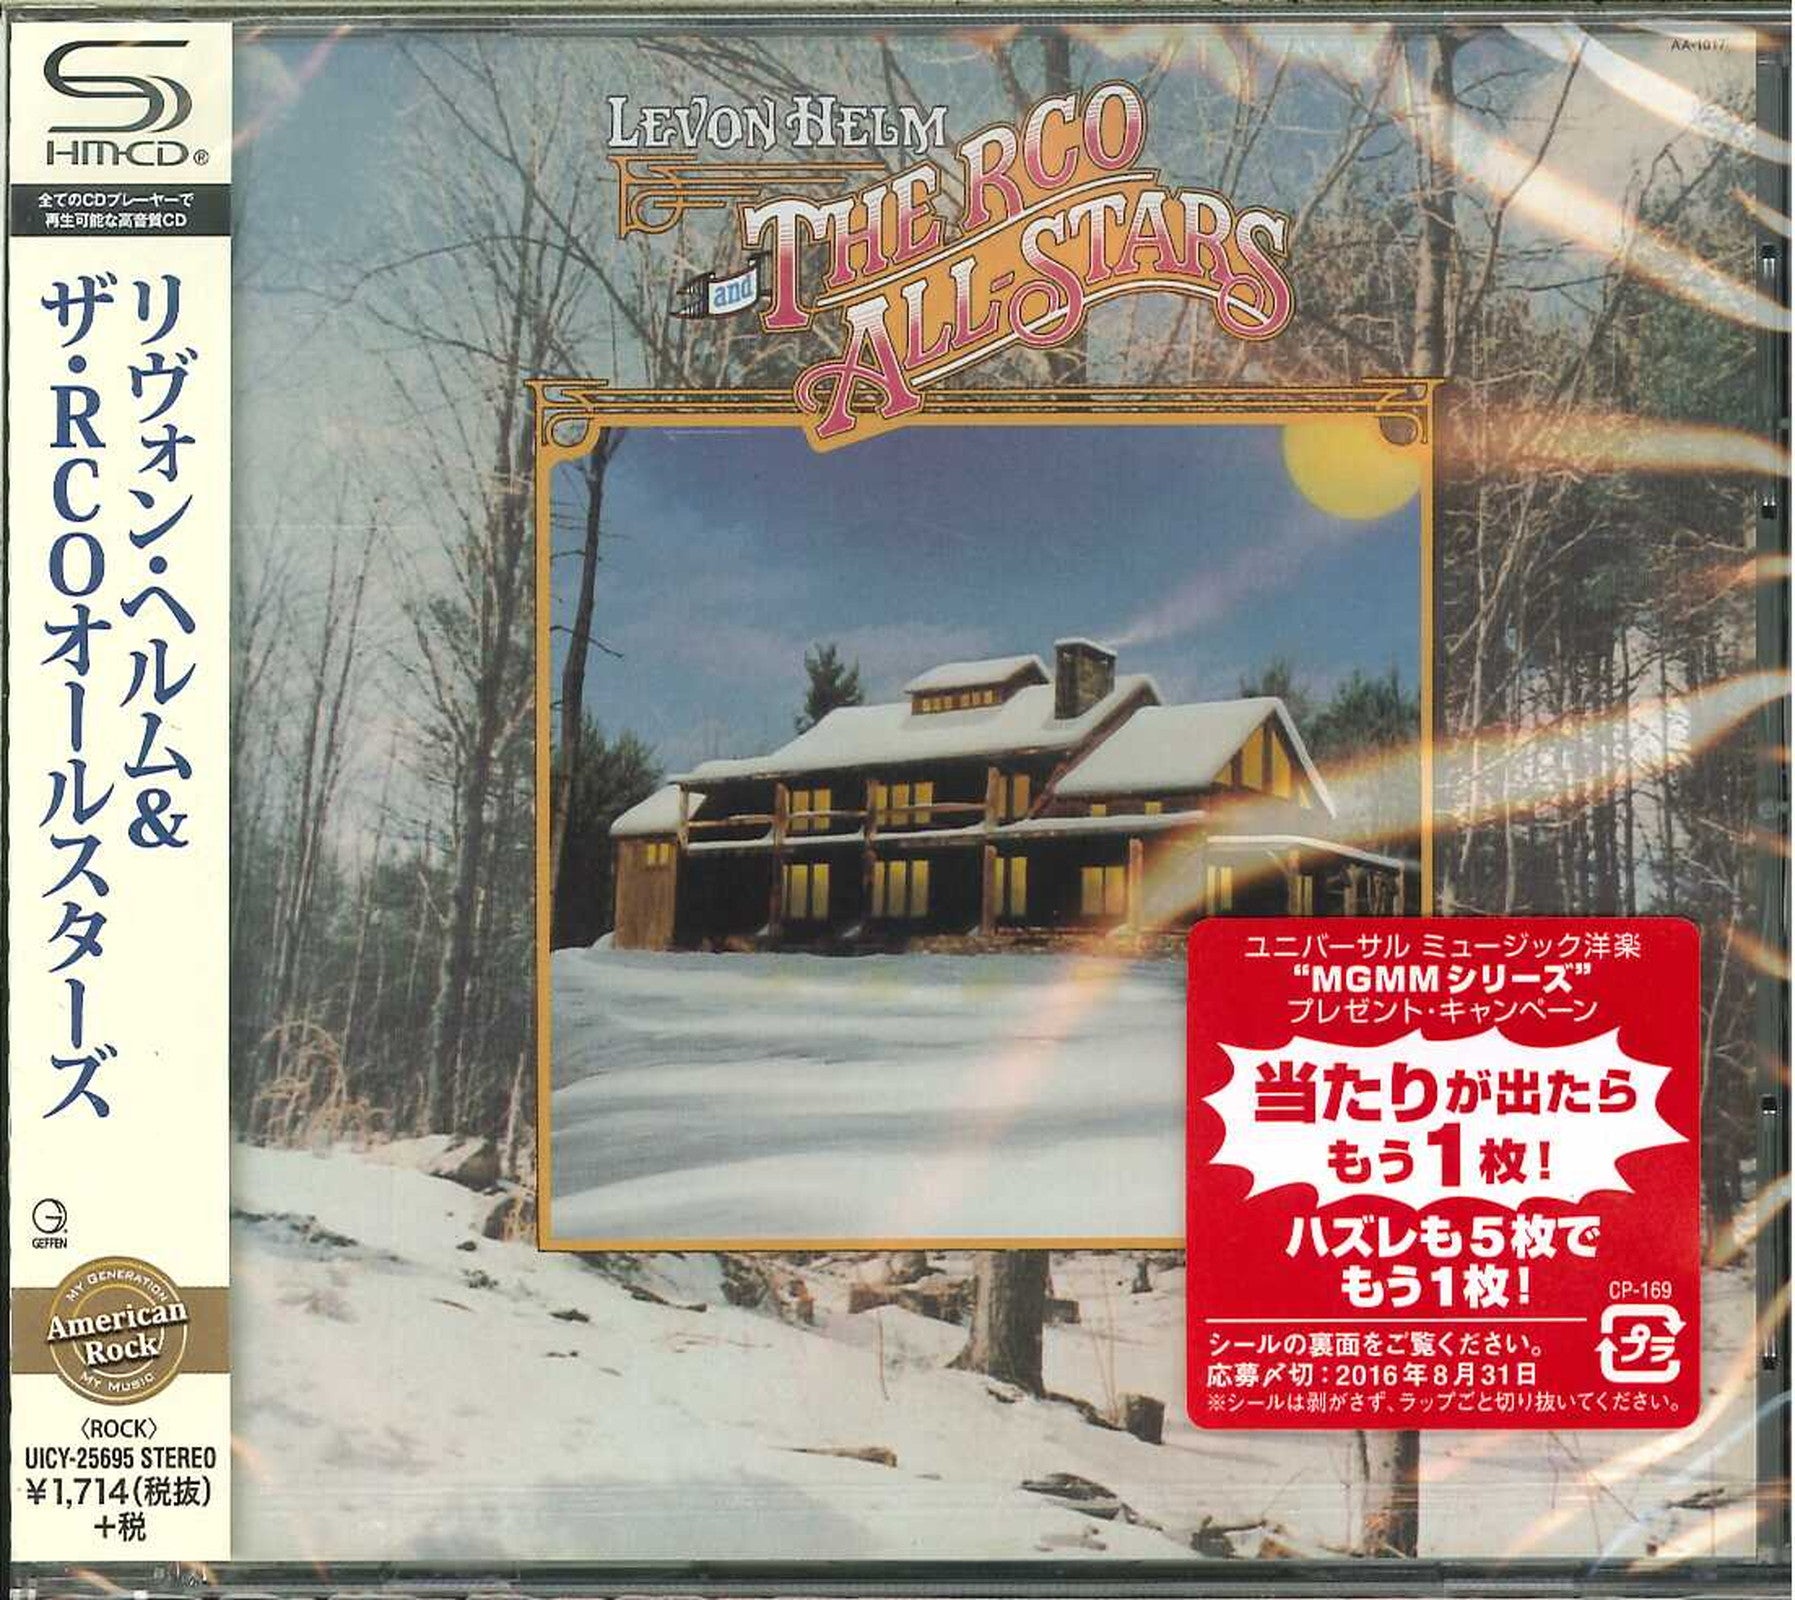 Levon Rco All Stars - Levon Helm And The Rco All-Stars - Japan - Japan Store